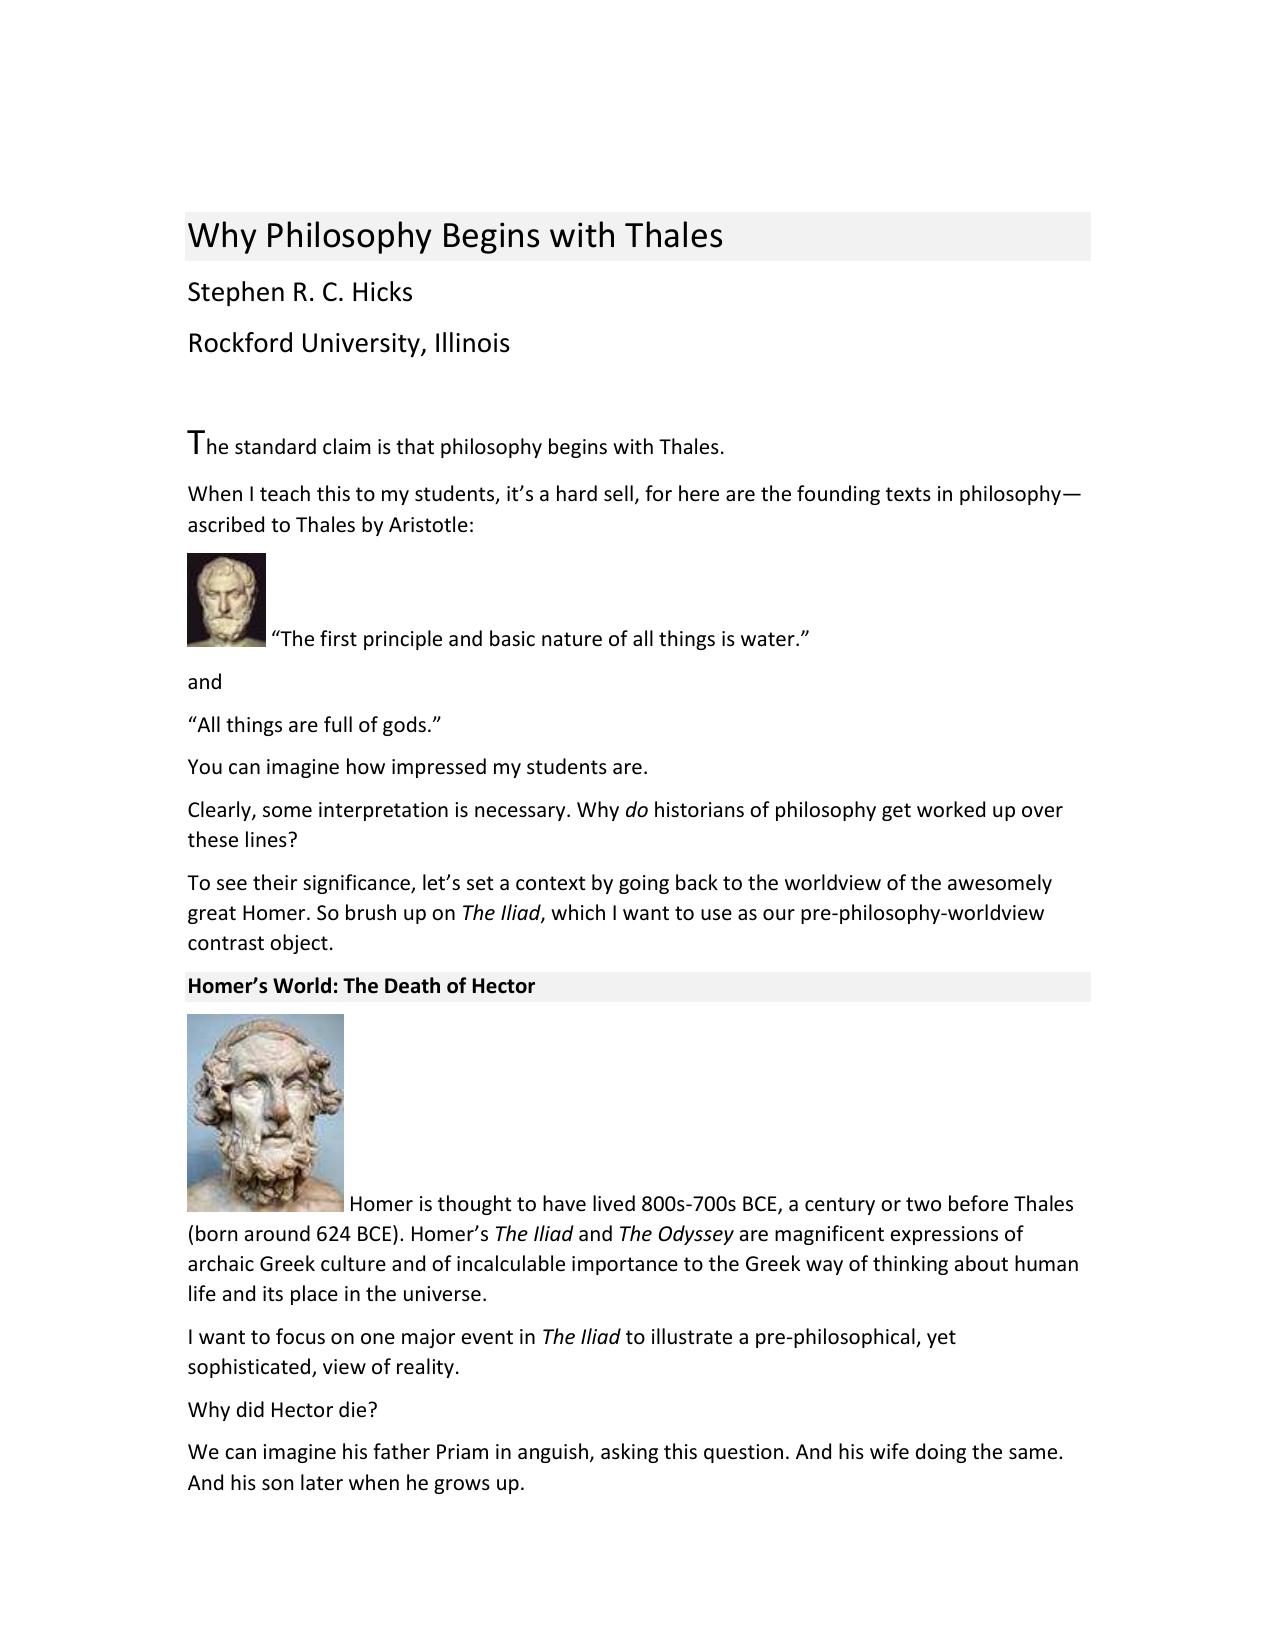 Why Philosophy Begins with Thales